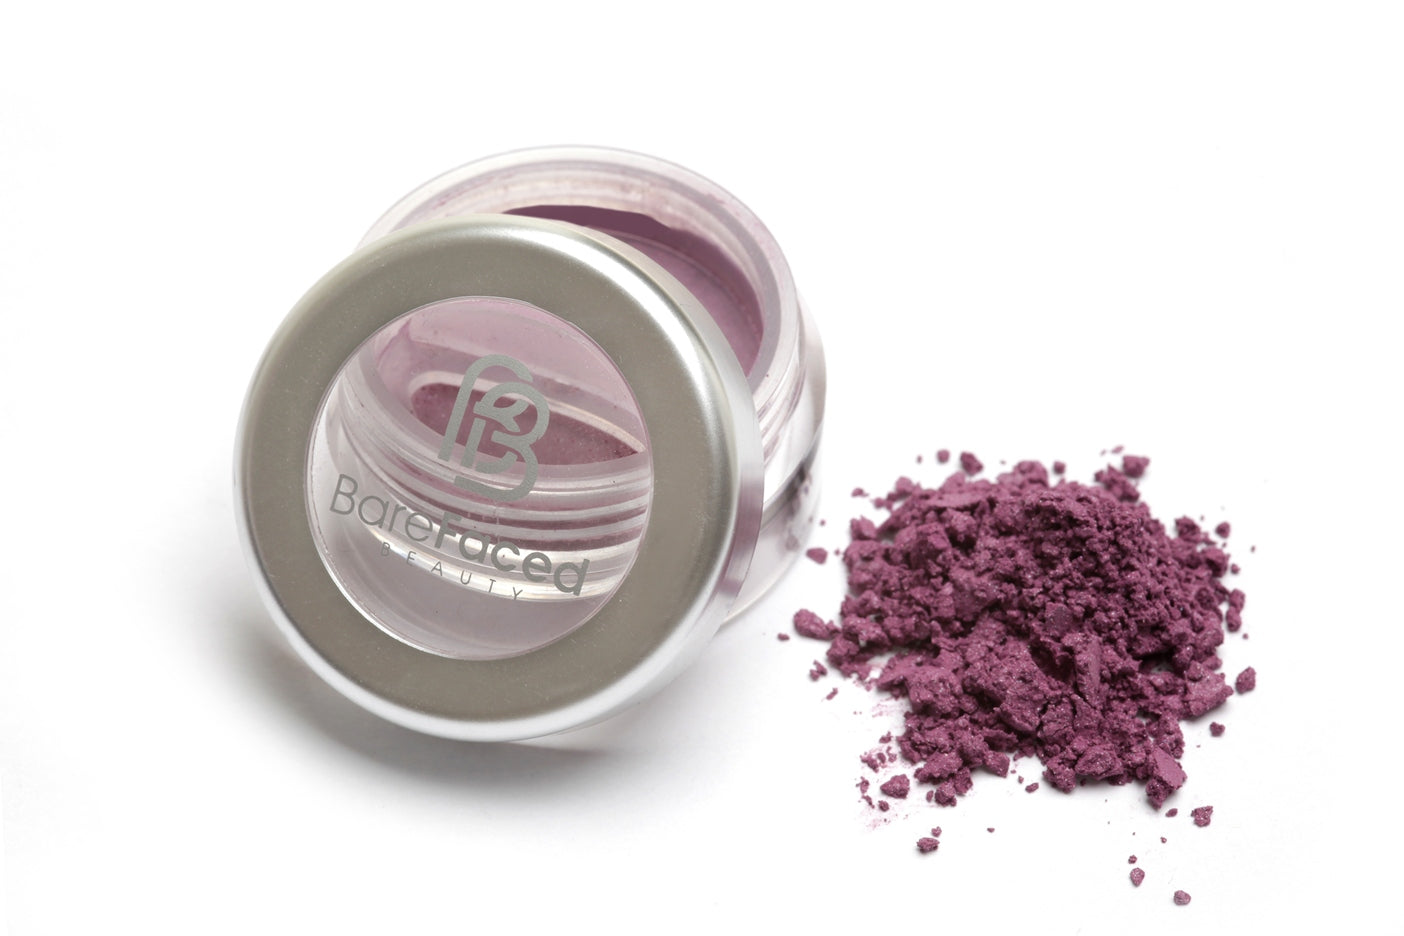 A small round pot of mineral eyeshadow, with a swatch of the powder next to it showing a Deep purple with a slight shimmer